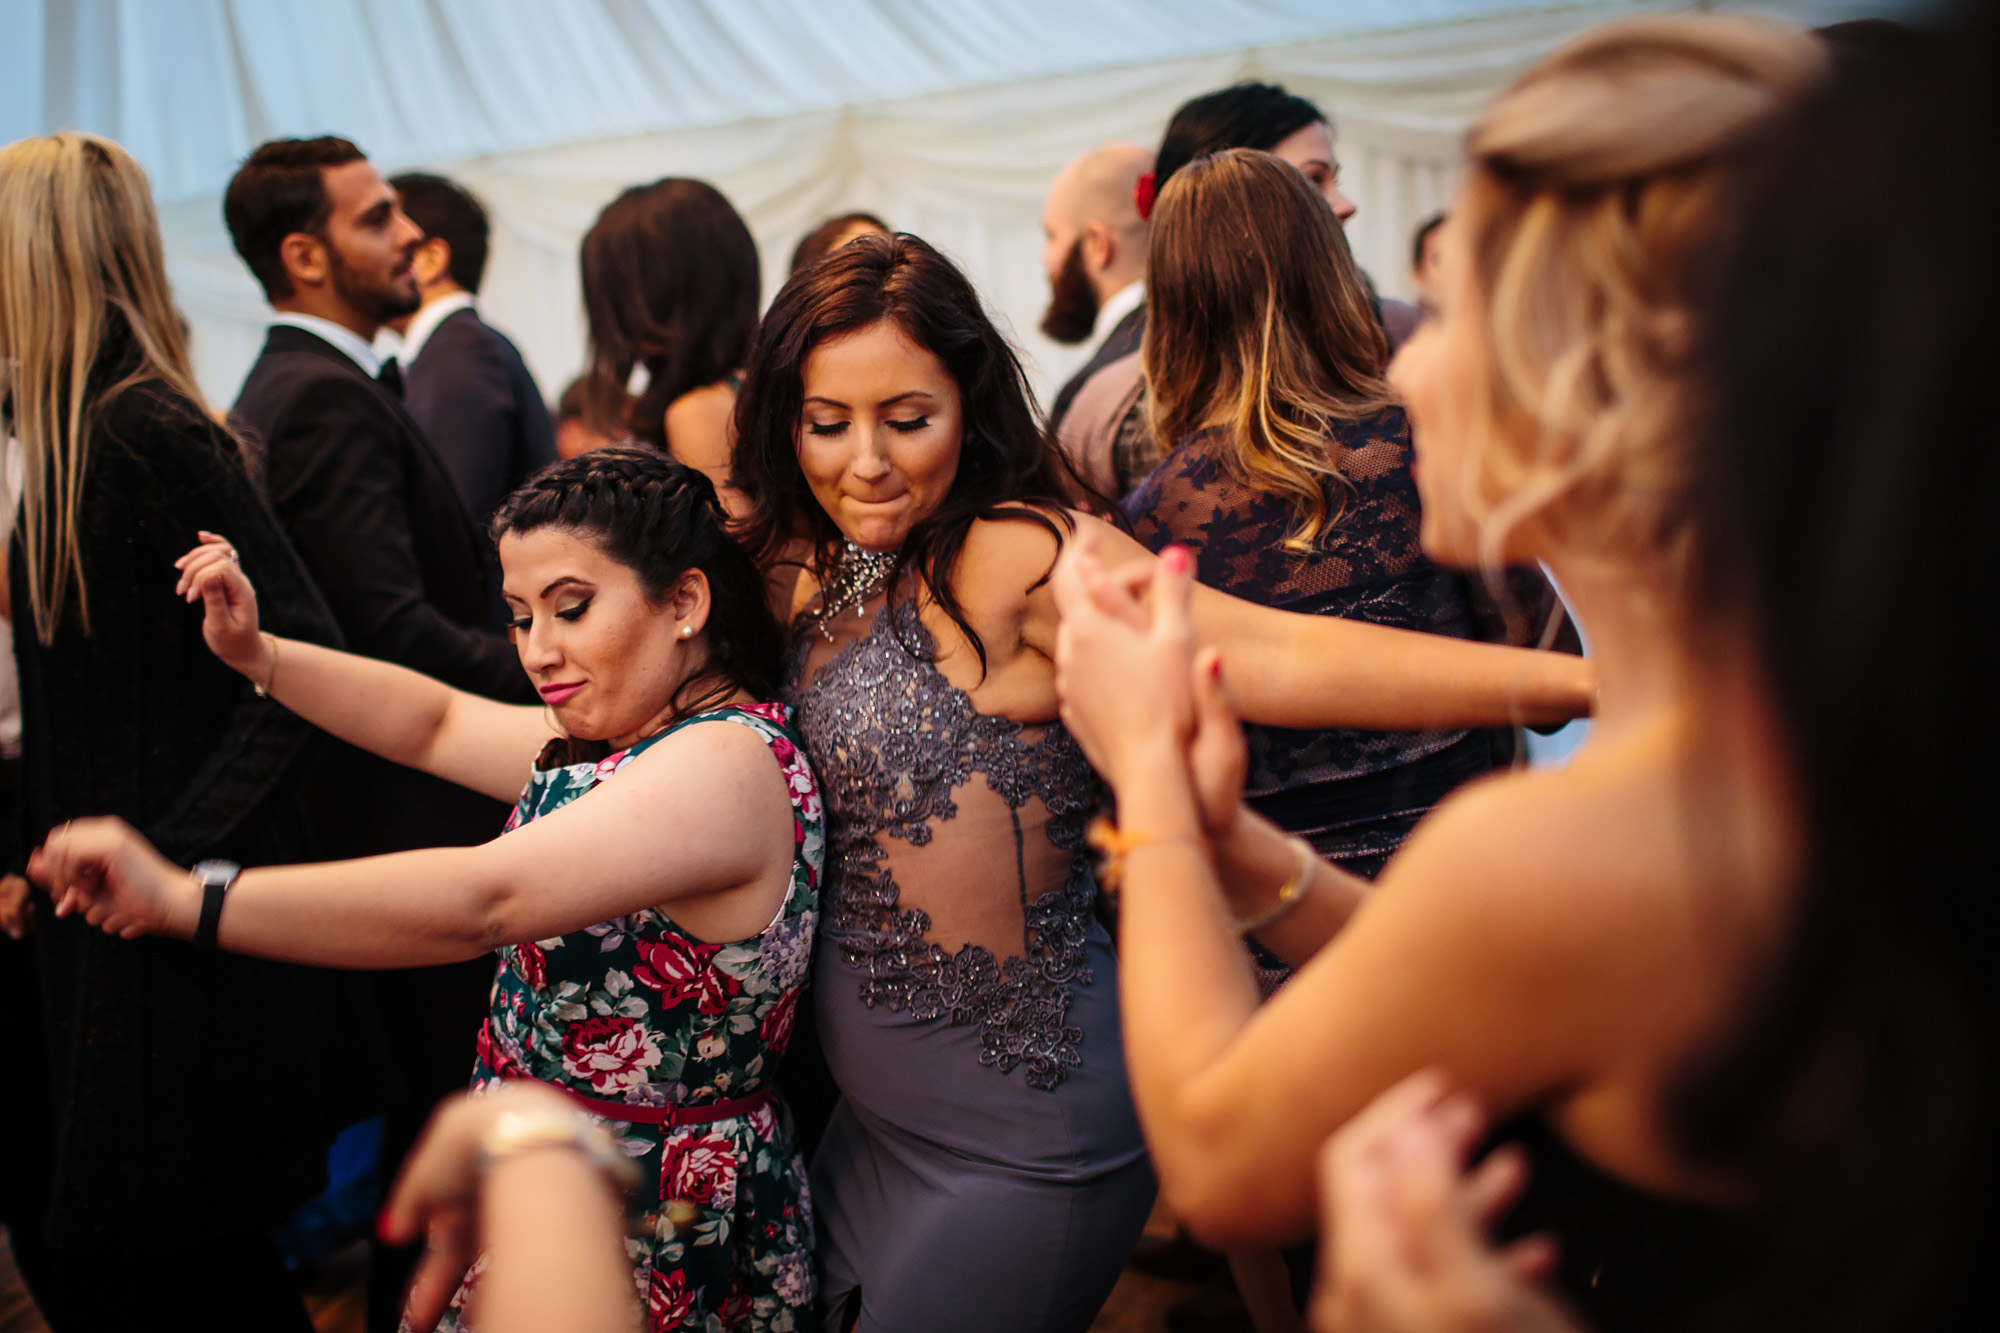 Guests dancing at a wedding in Yorkshire